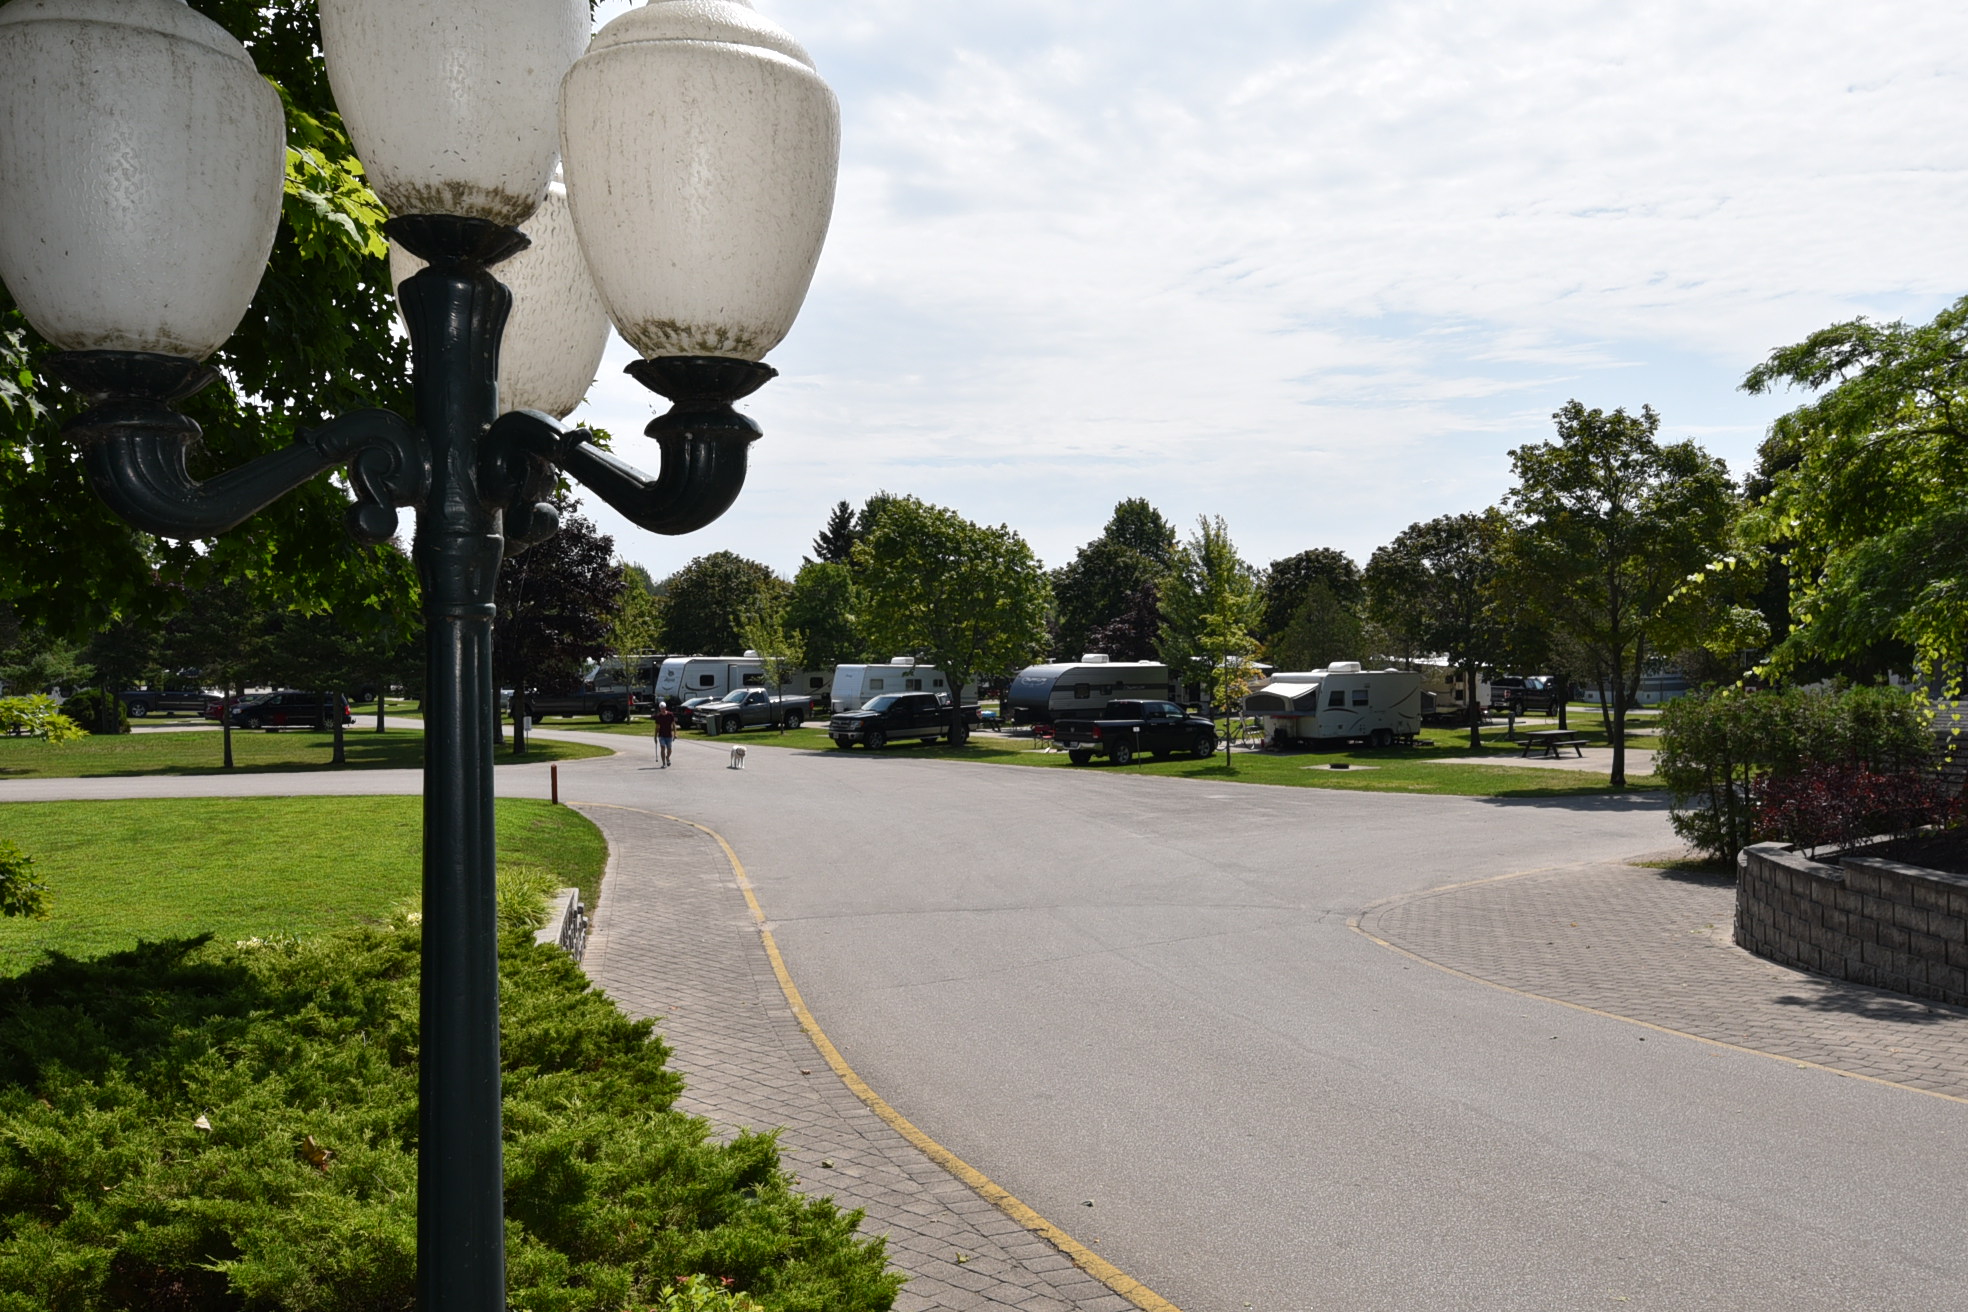 View of campground with streetlight.